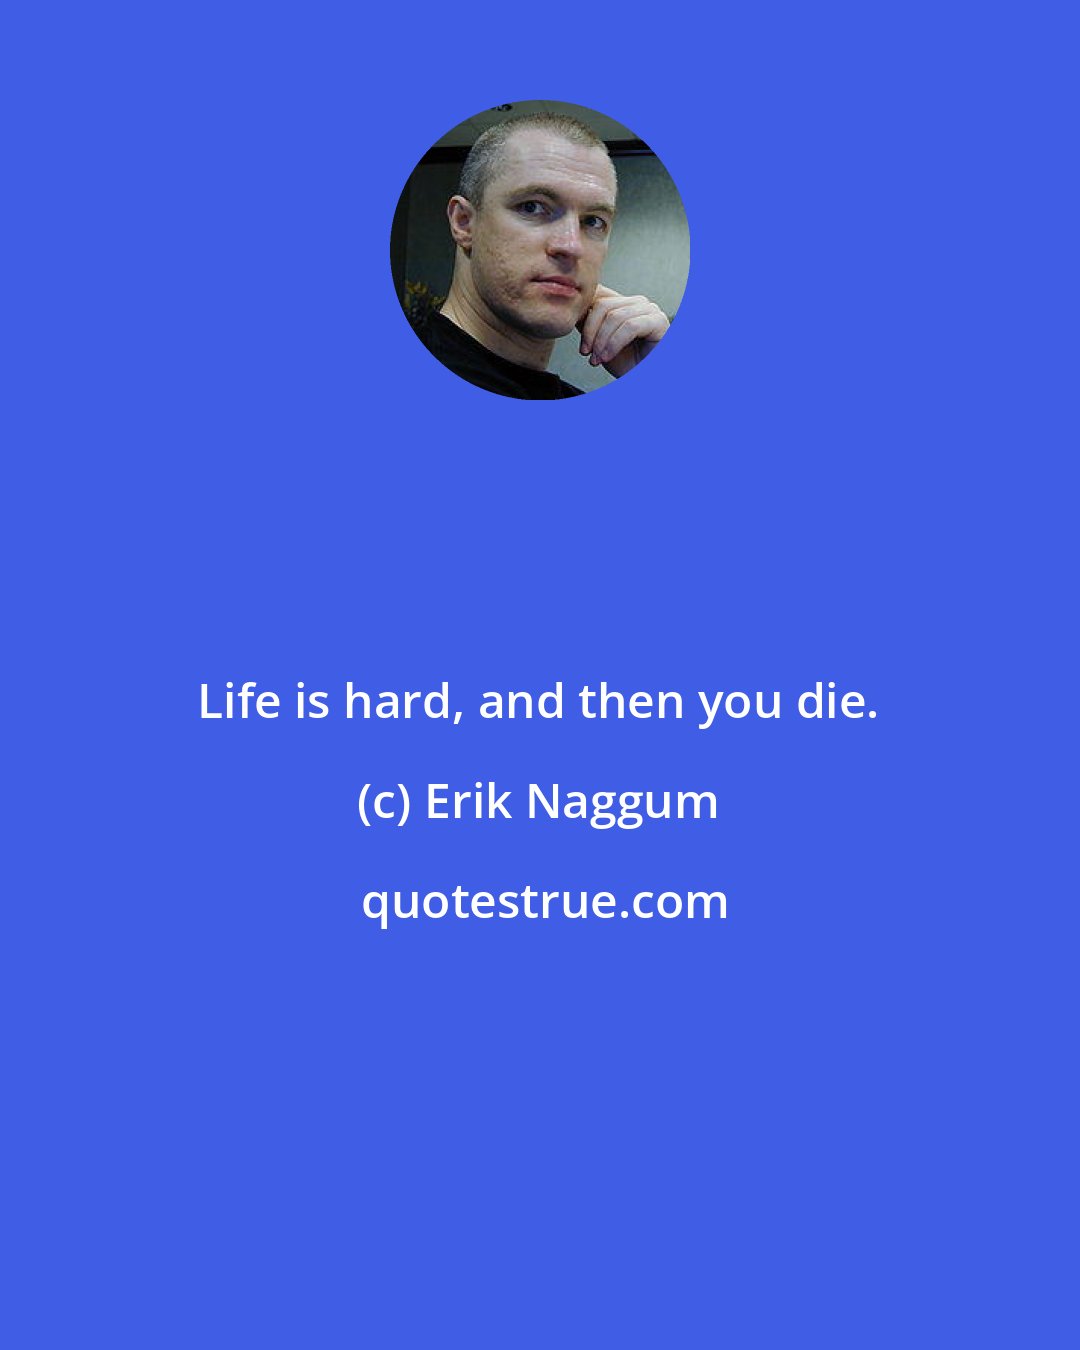 Erik Naggum: Life is hard, and then you die.